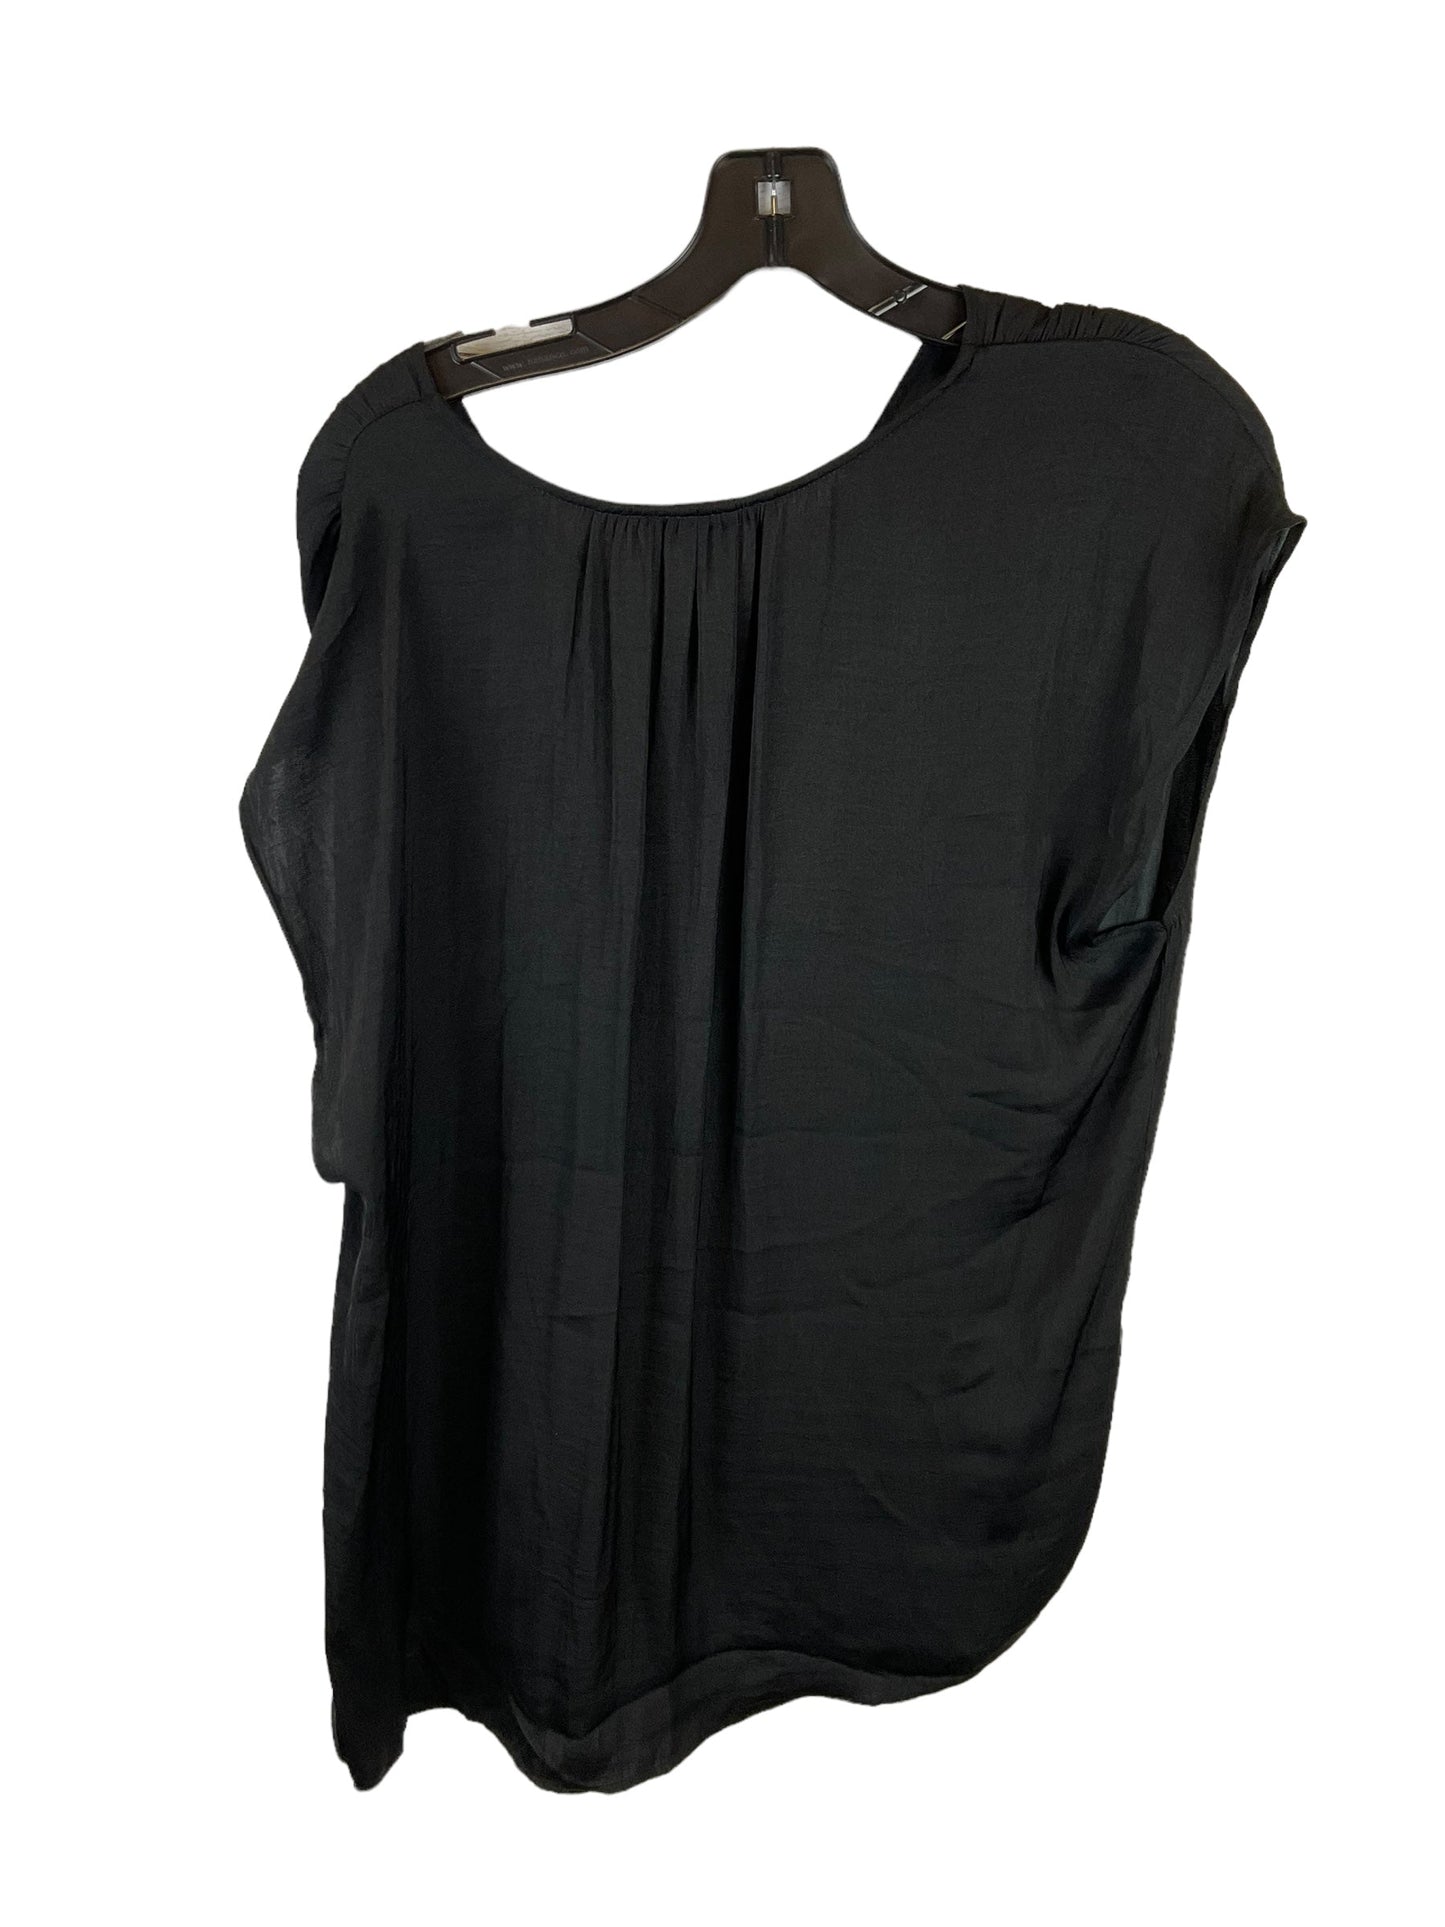 Top Sleeveless By Rachel Roy  Size: Large